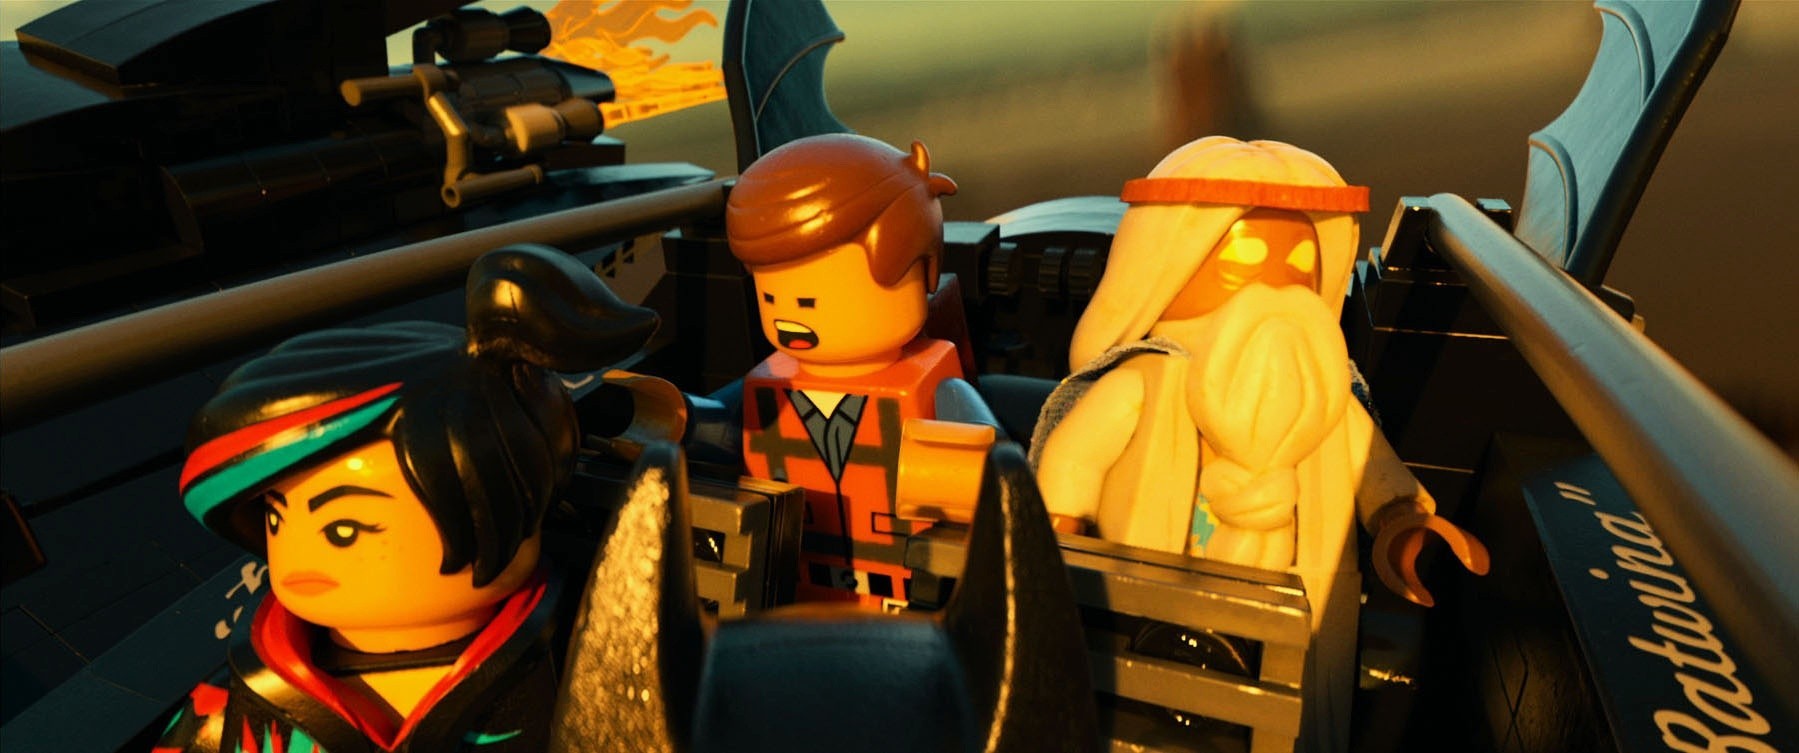 Lucy, Emmet and Vitruvius from Warner Bros. Pictures' The Lego Movie (2014)